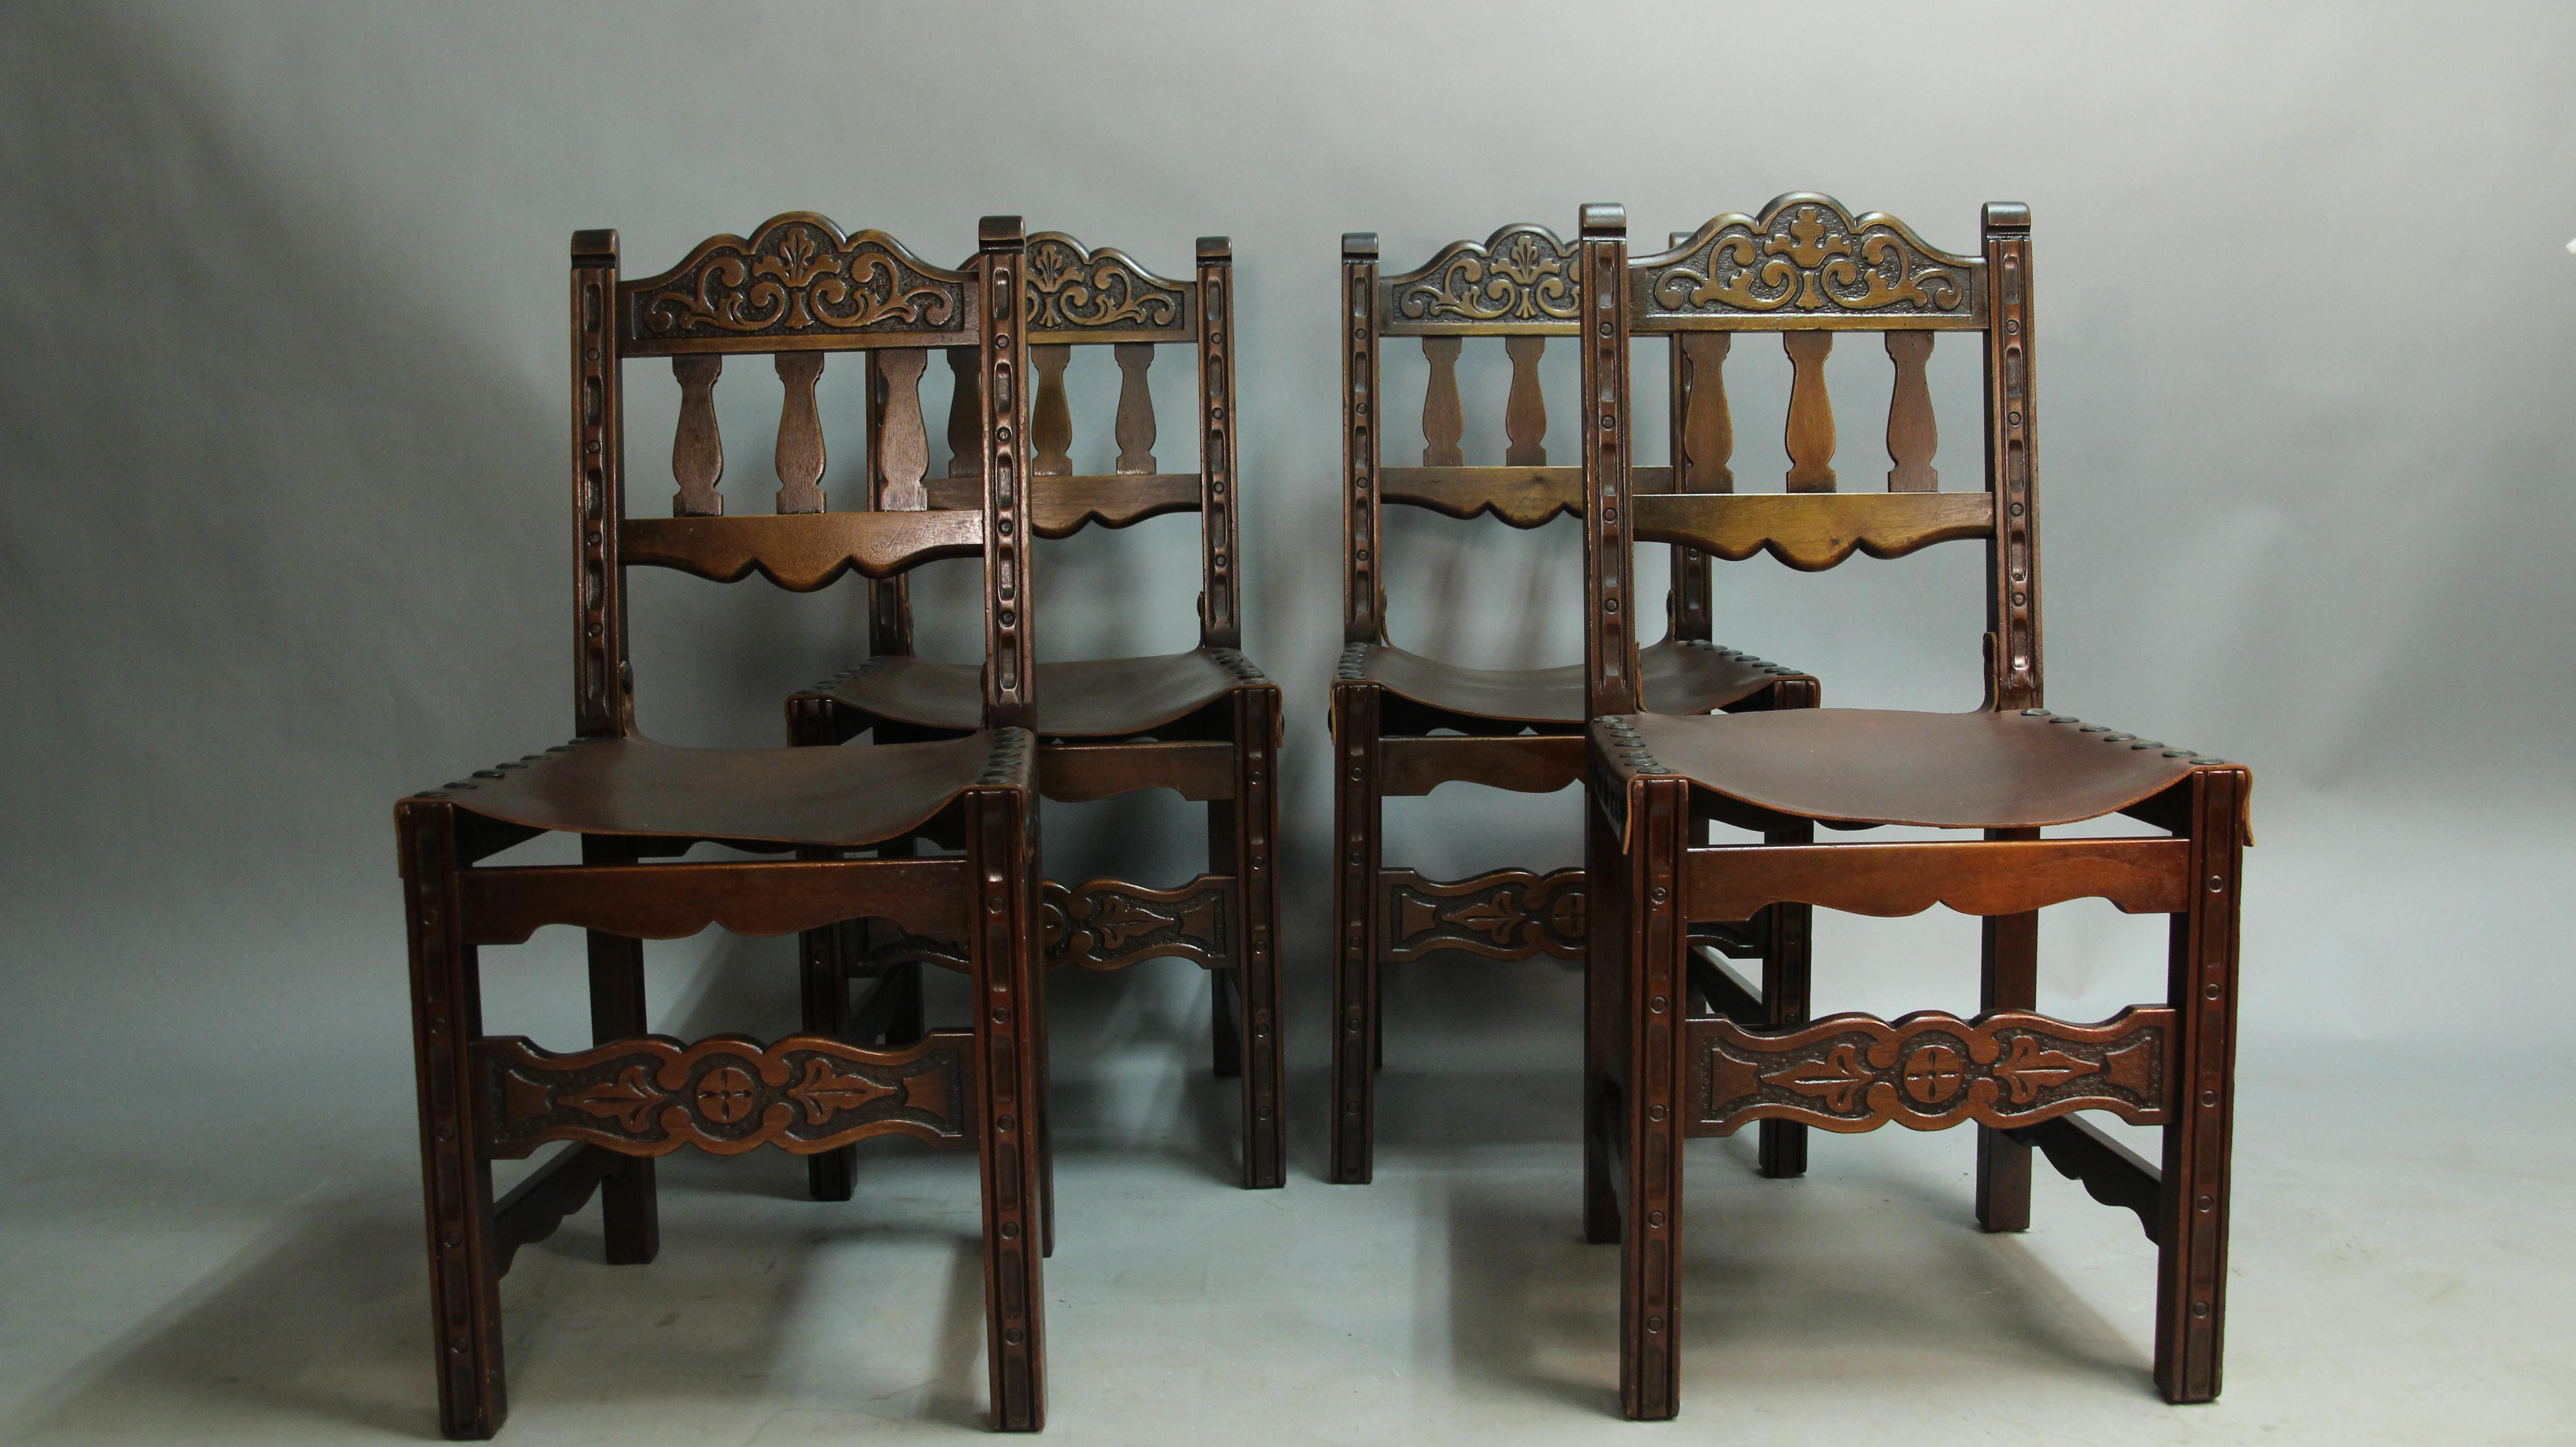 Antique 1920s Set of 6 Spanish Revival Dining Room Chairs with Leather (Spanisch Kolonial)